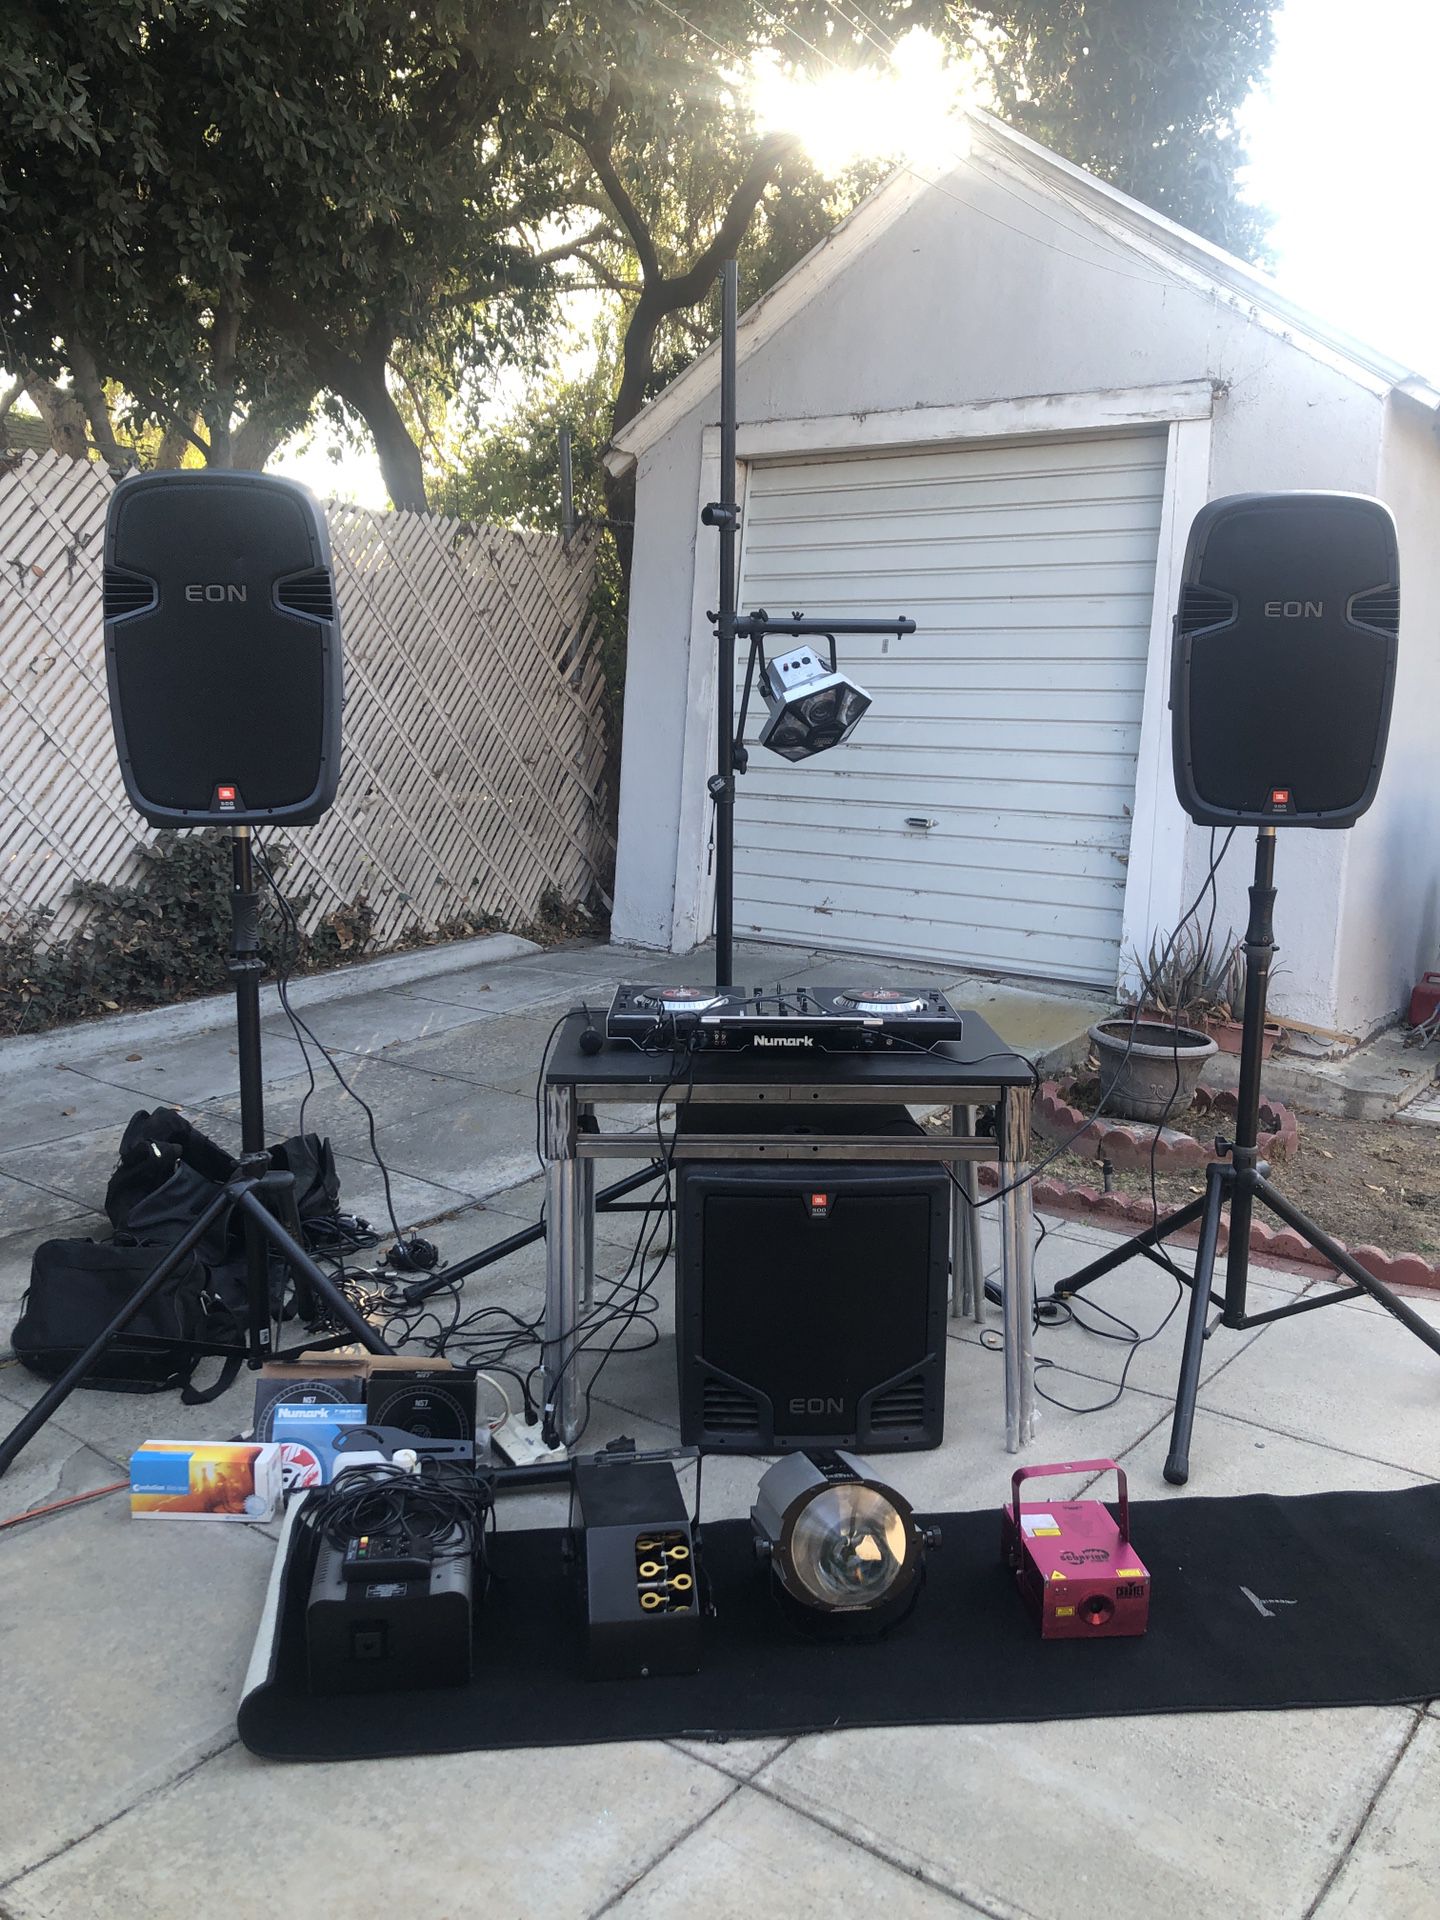 Live DJ Equipment - Mixer/2 speakers/sub/lights and more!